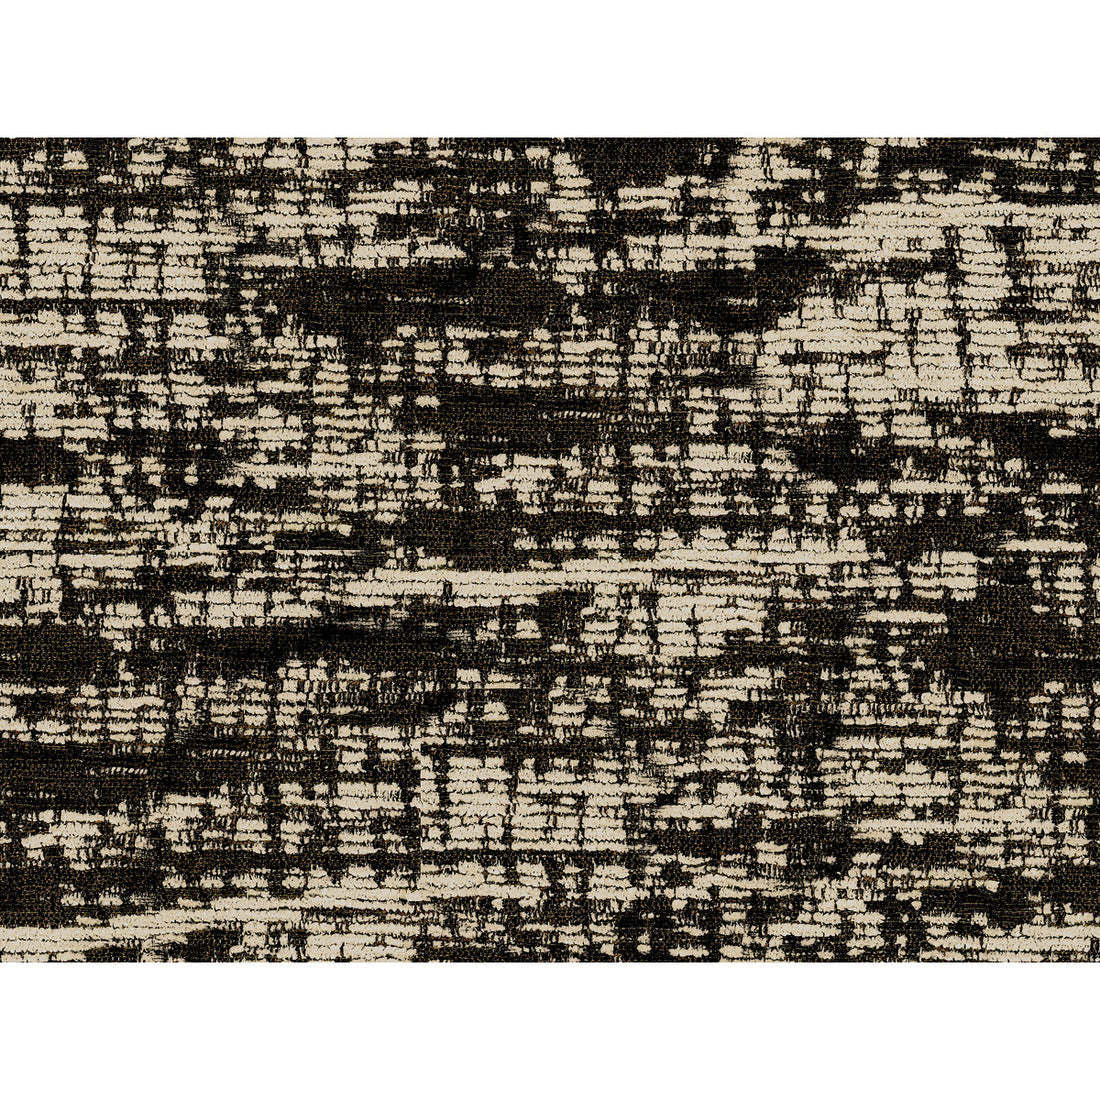 Whisk fabric in shadow color - pattern GWF-3719.18.0 - by Lee Jofa Modern in the Kelly Wearstler Textures collection